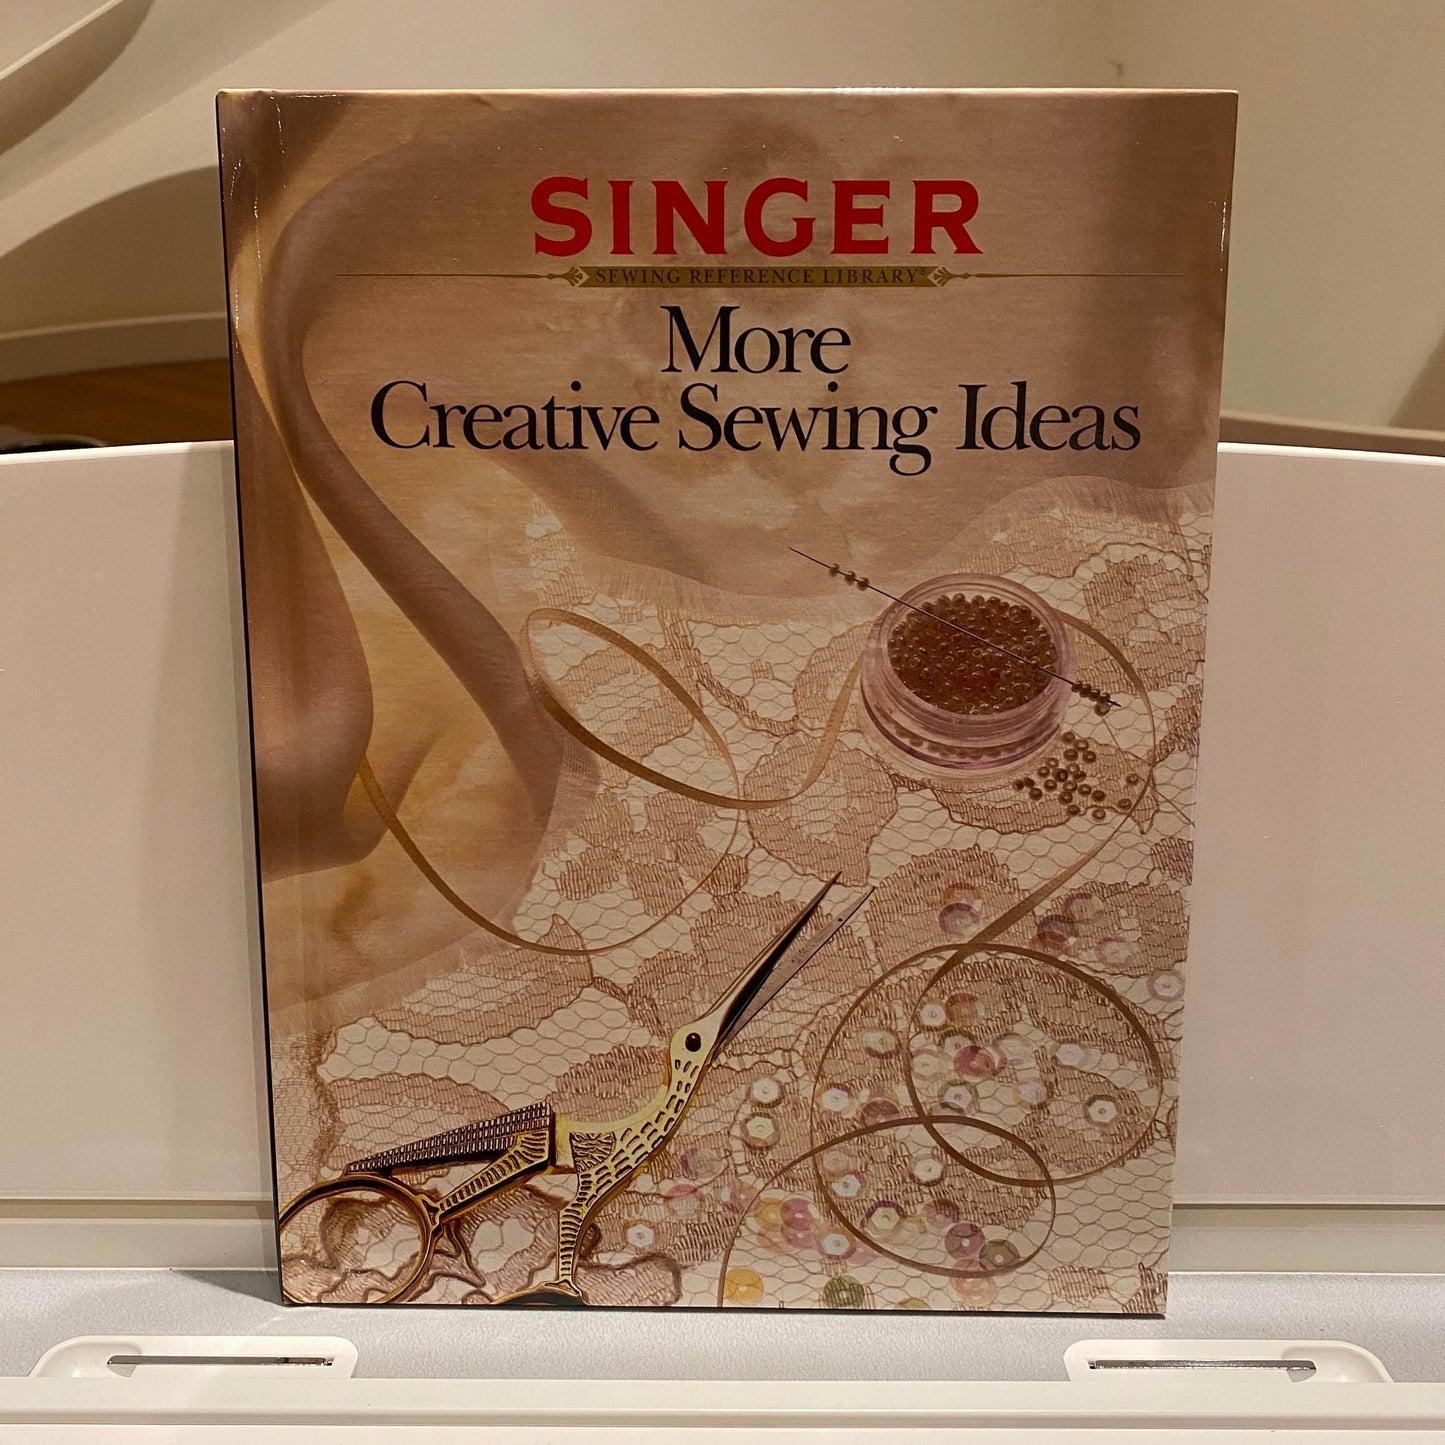 Singer Sewing Reference Library - More Creative Sewing Ideas (hardback book)